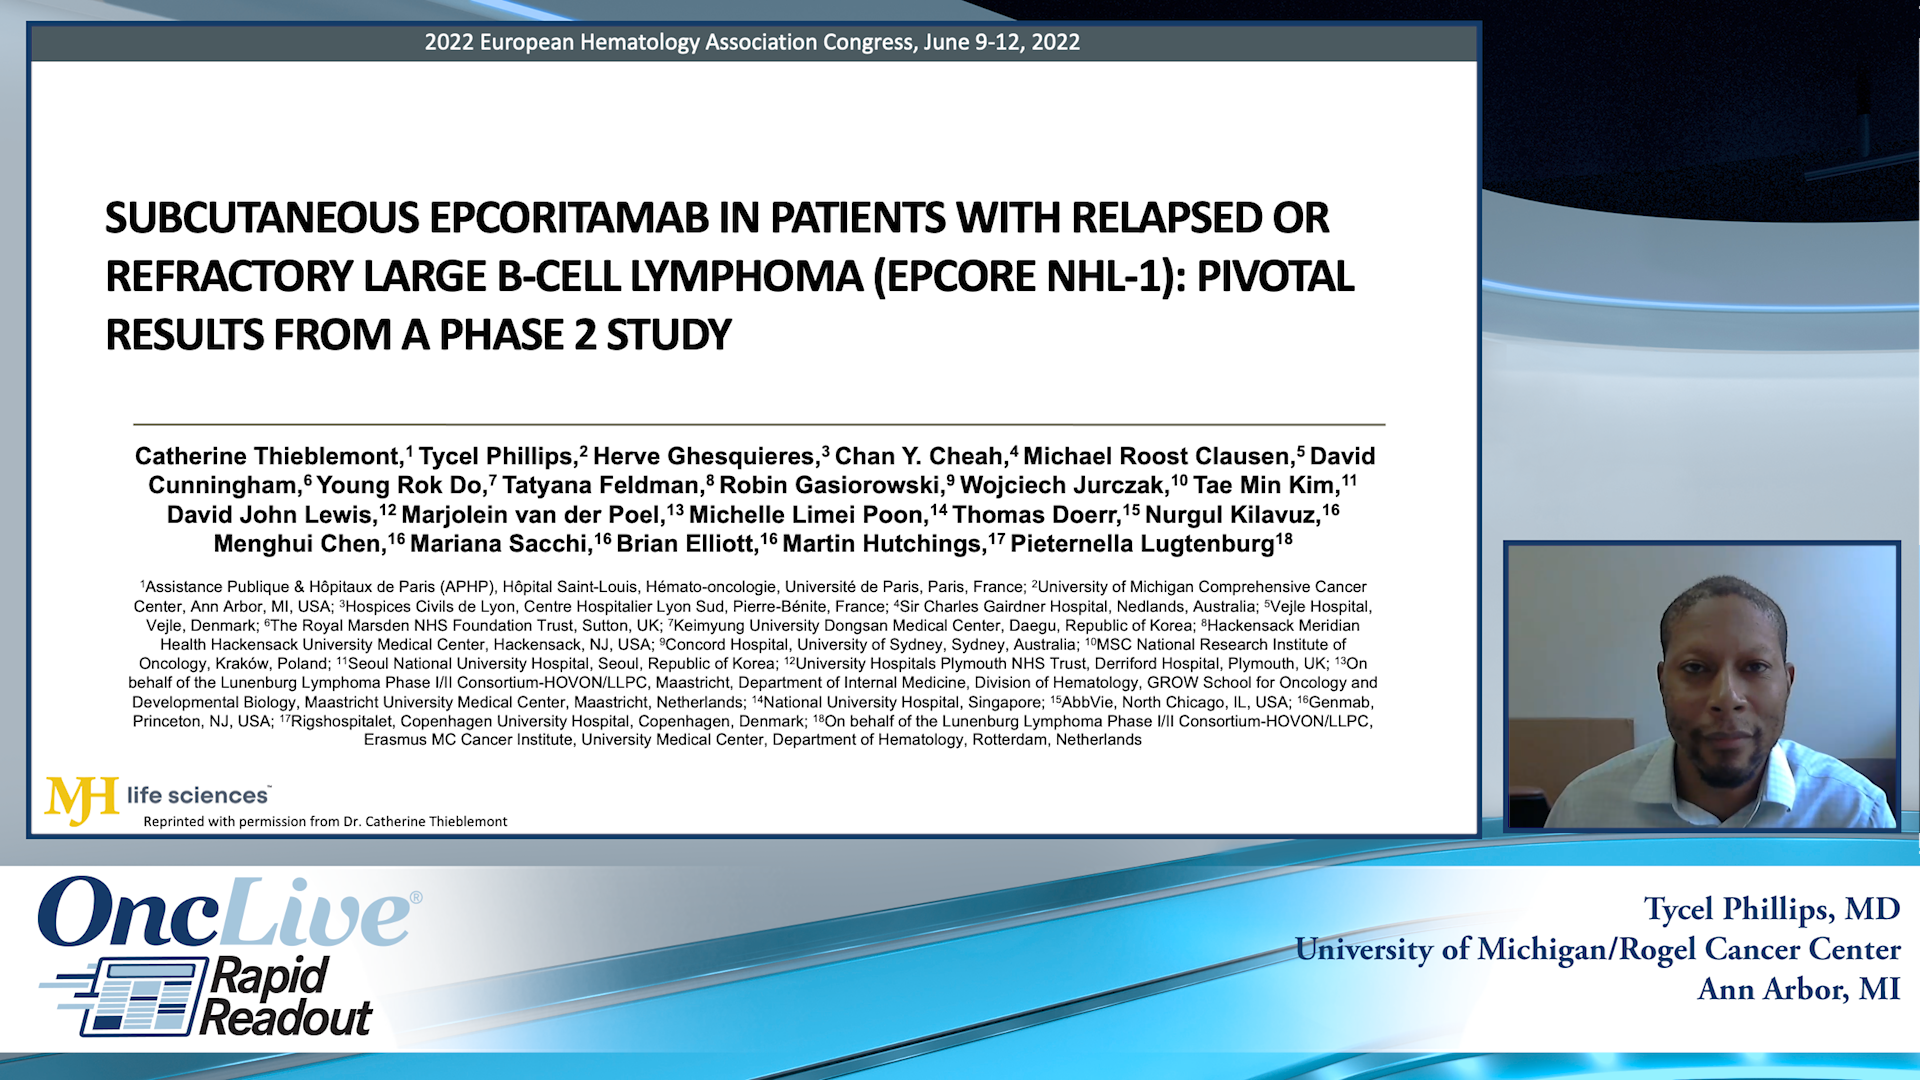 Subcutaneous Epcoritamab in Patients with Relapsed or Refractory Large B-Cell Lymphoma (EPCORE NHL-1): Pivotal Results from a Phase 2 Study